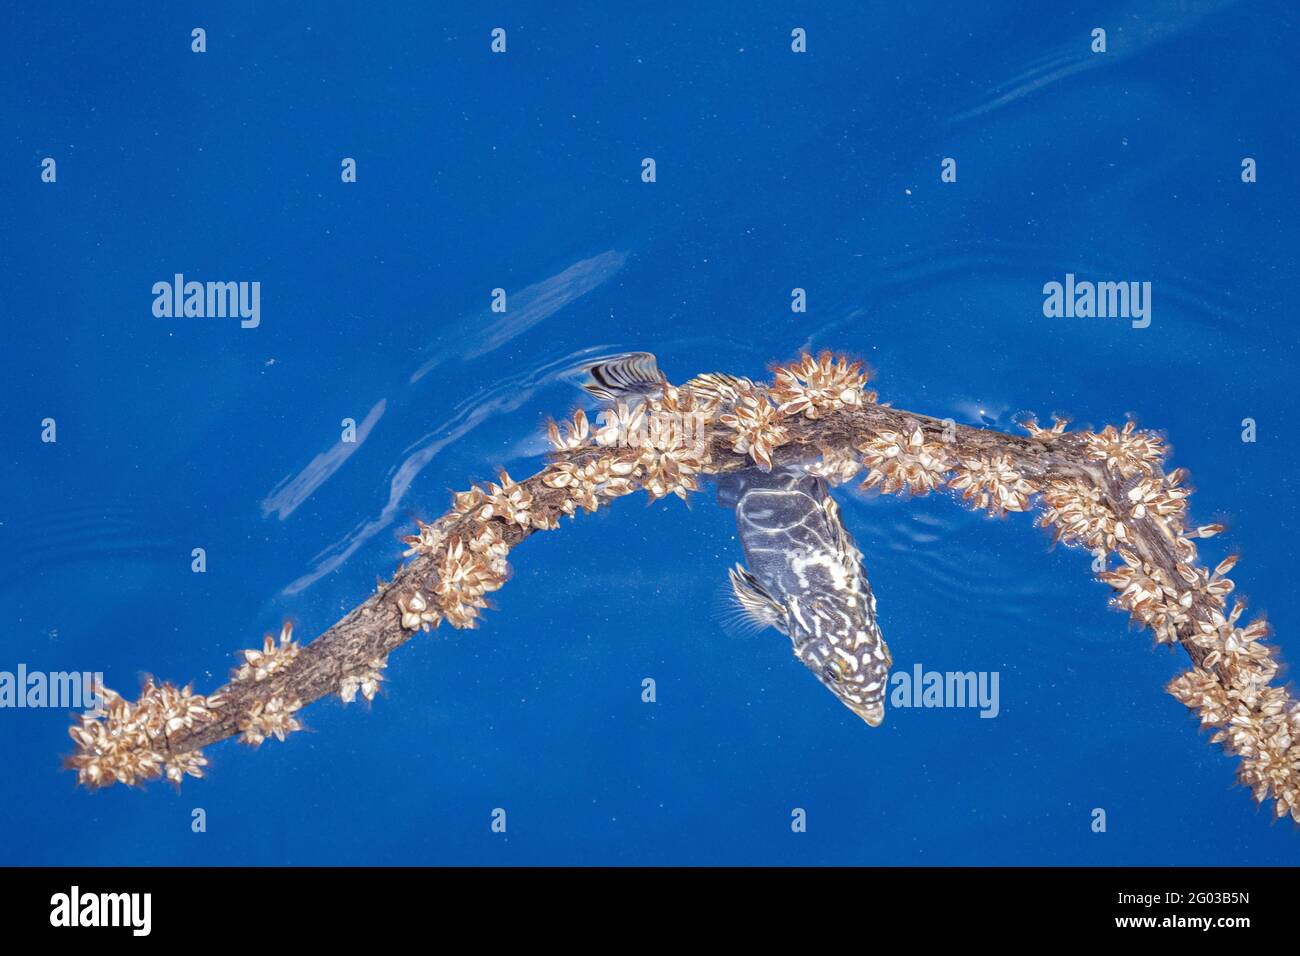 American Grouper fish hiding under lepas clam branch on the Mediterranean sea surface Stock Photo